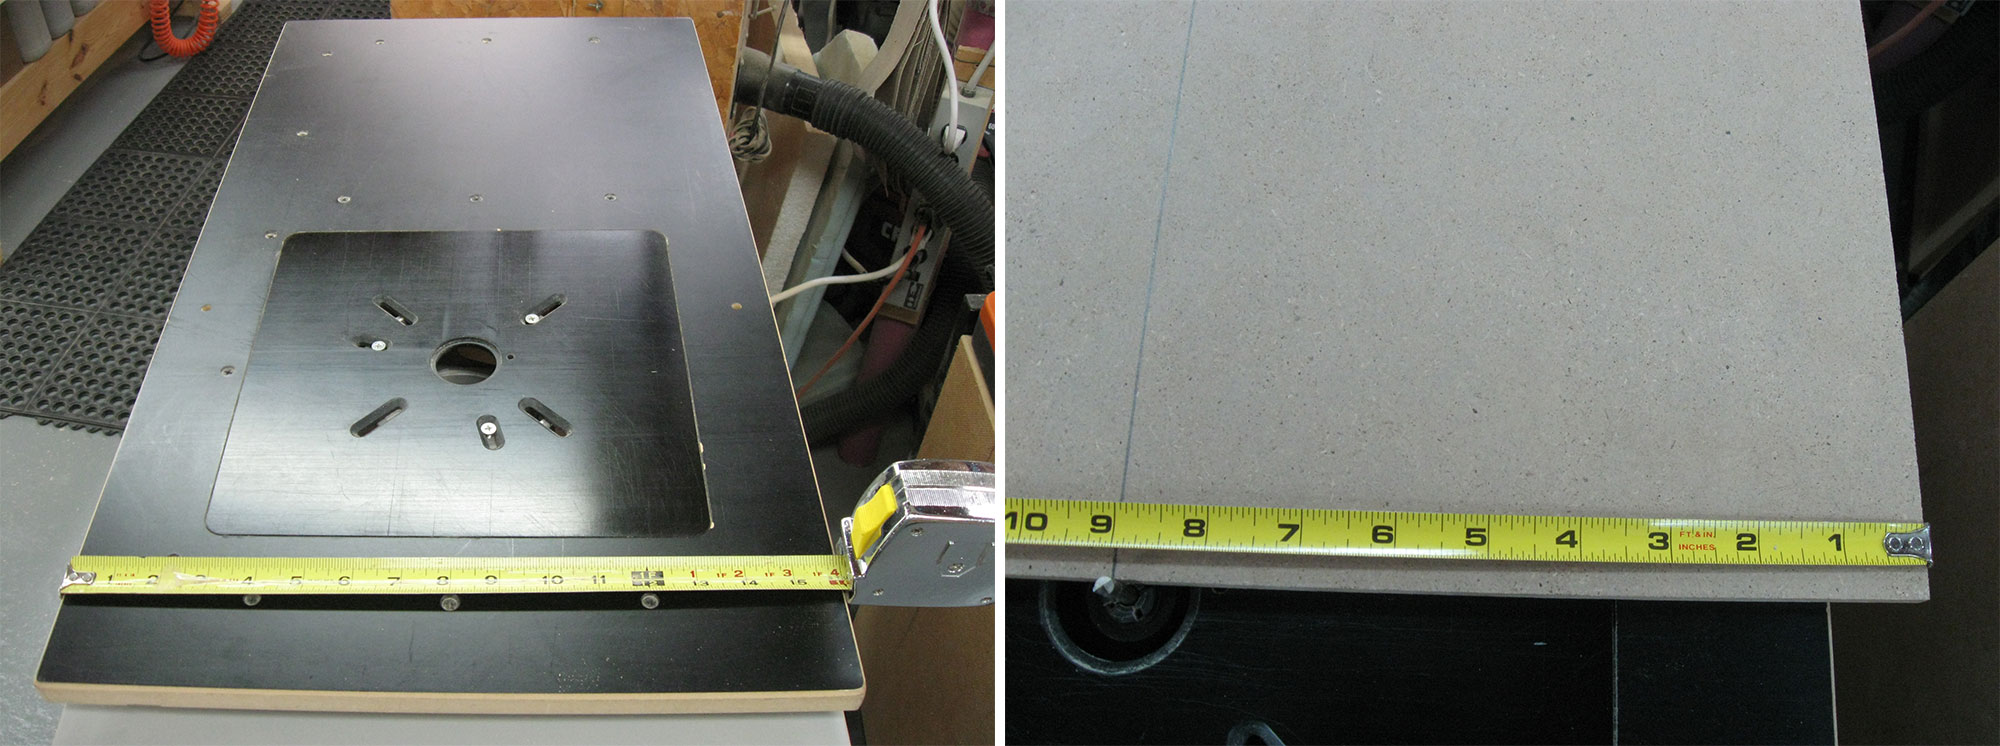 Left: Measuring the width of the router table top. Right: Measuring and cutting a sheet of MDF.